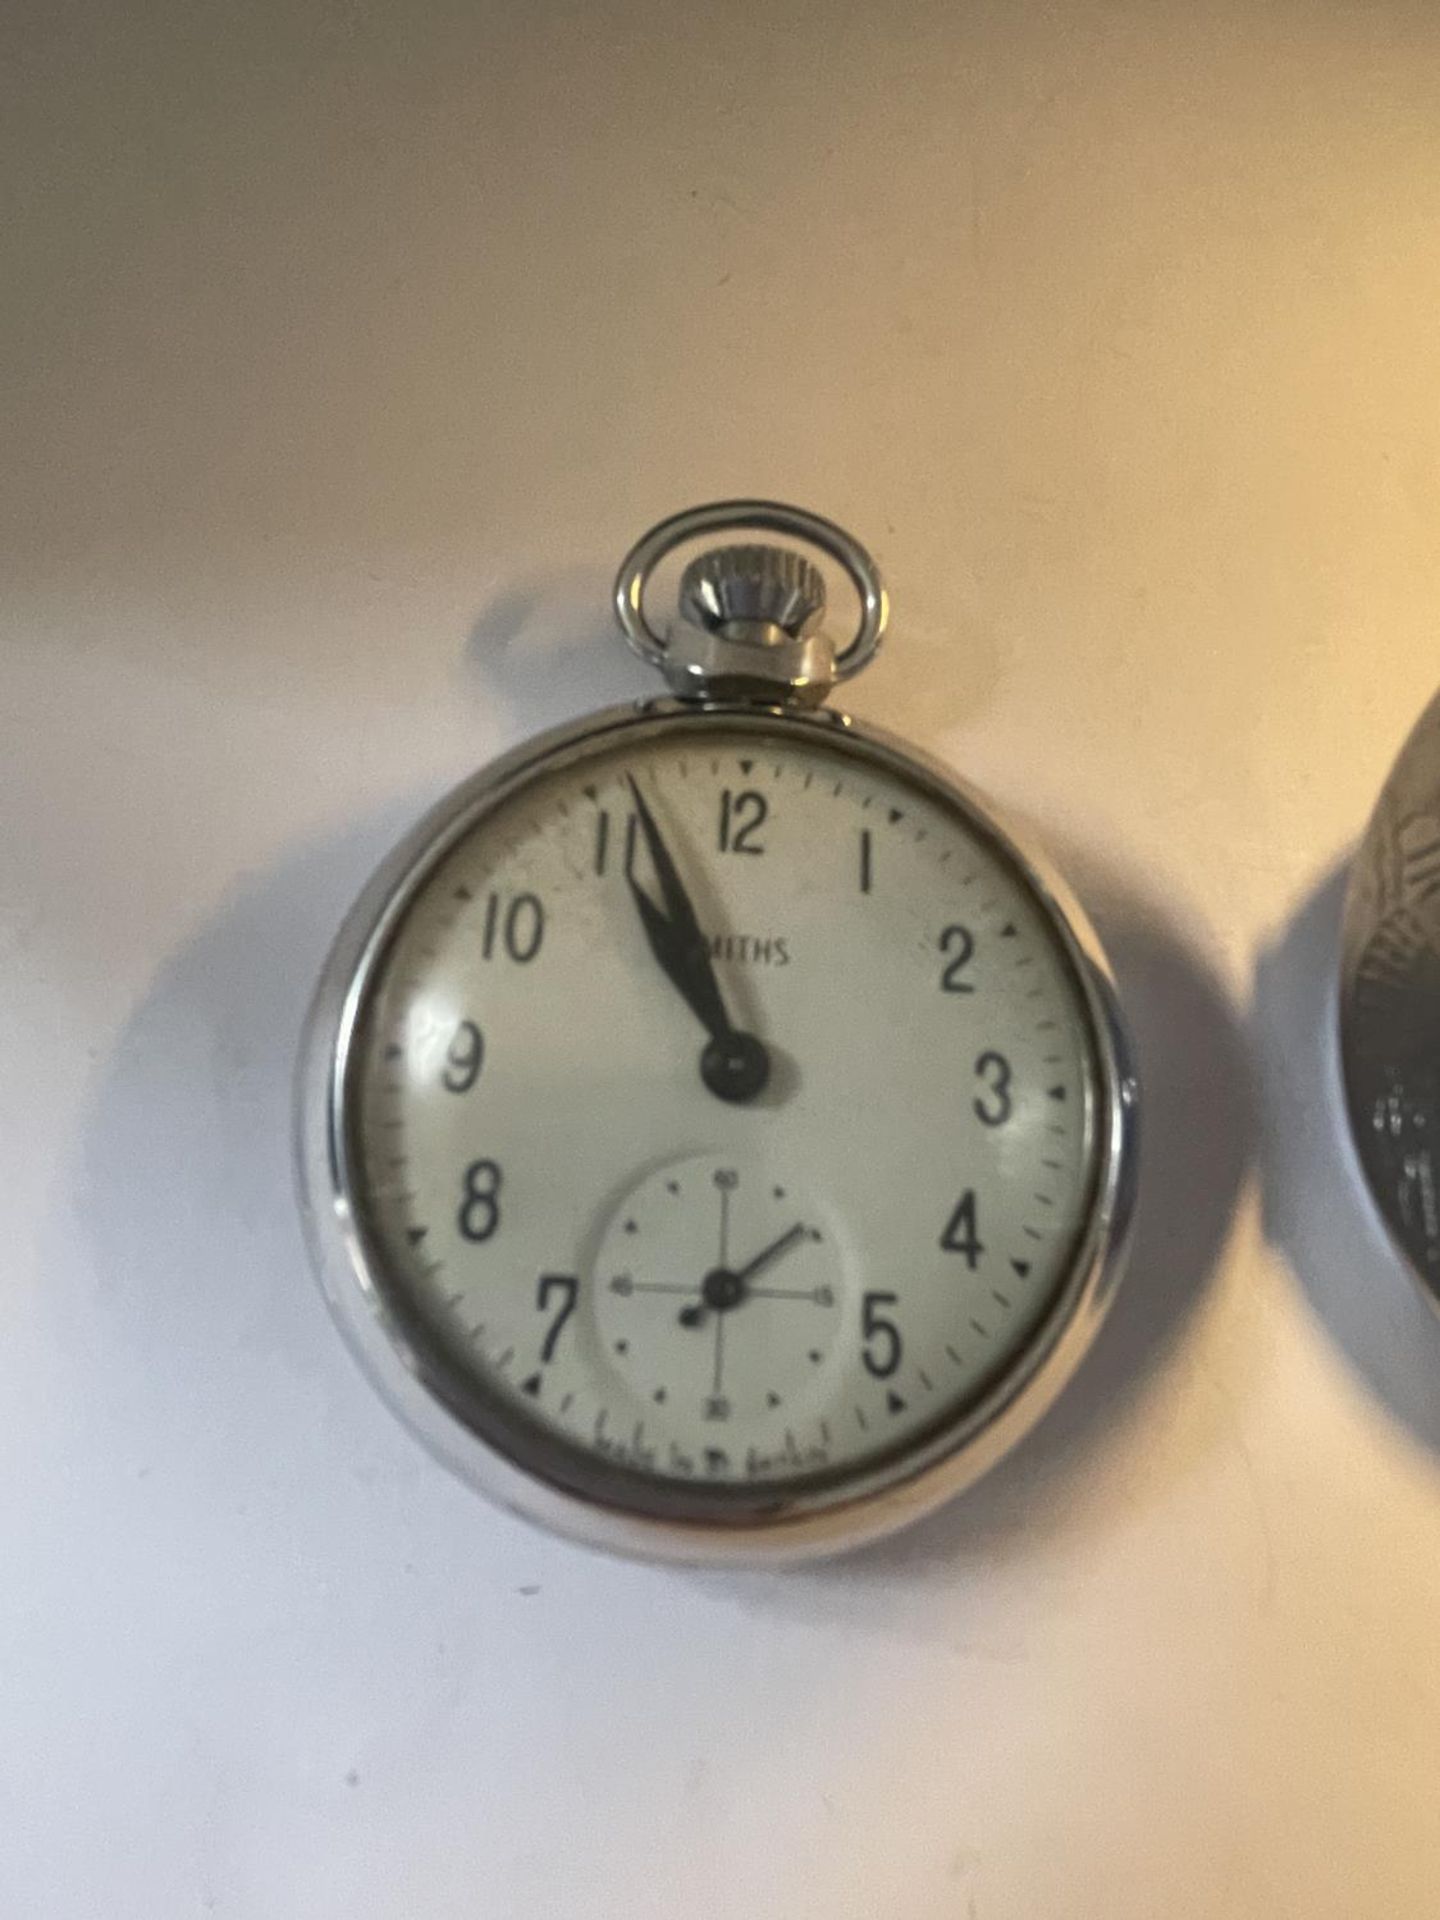 TWO CHROME POCKET WATCHES - Image 2 of 4